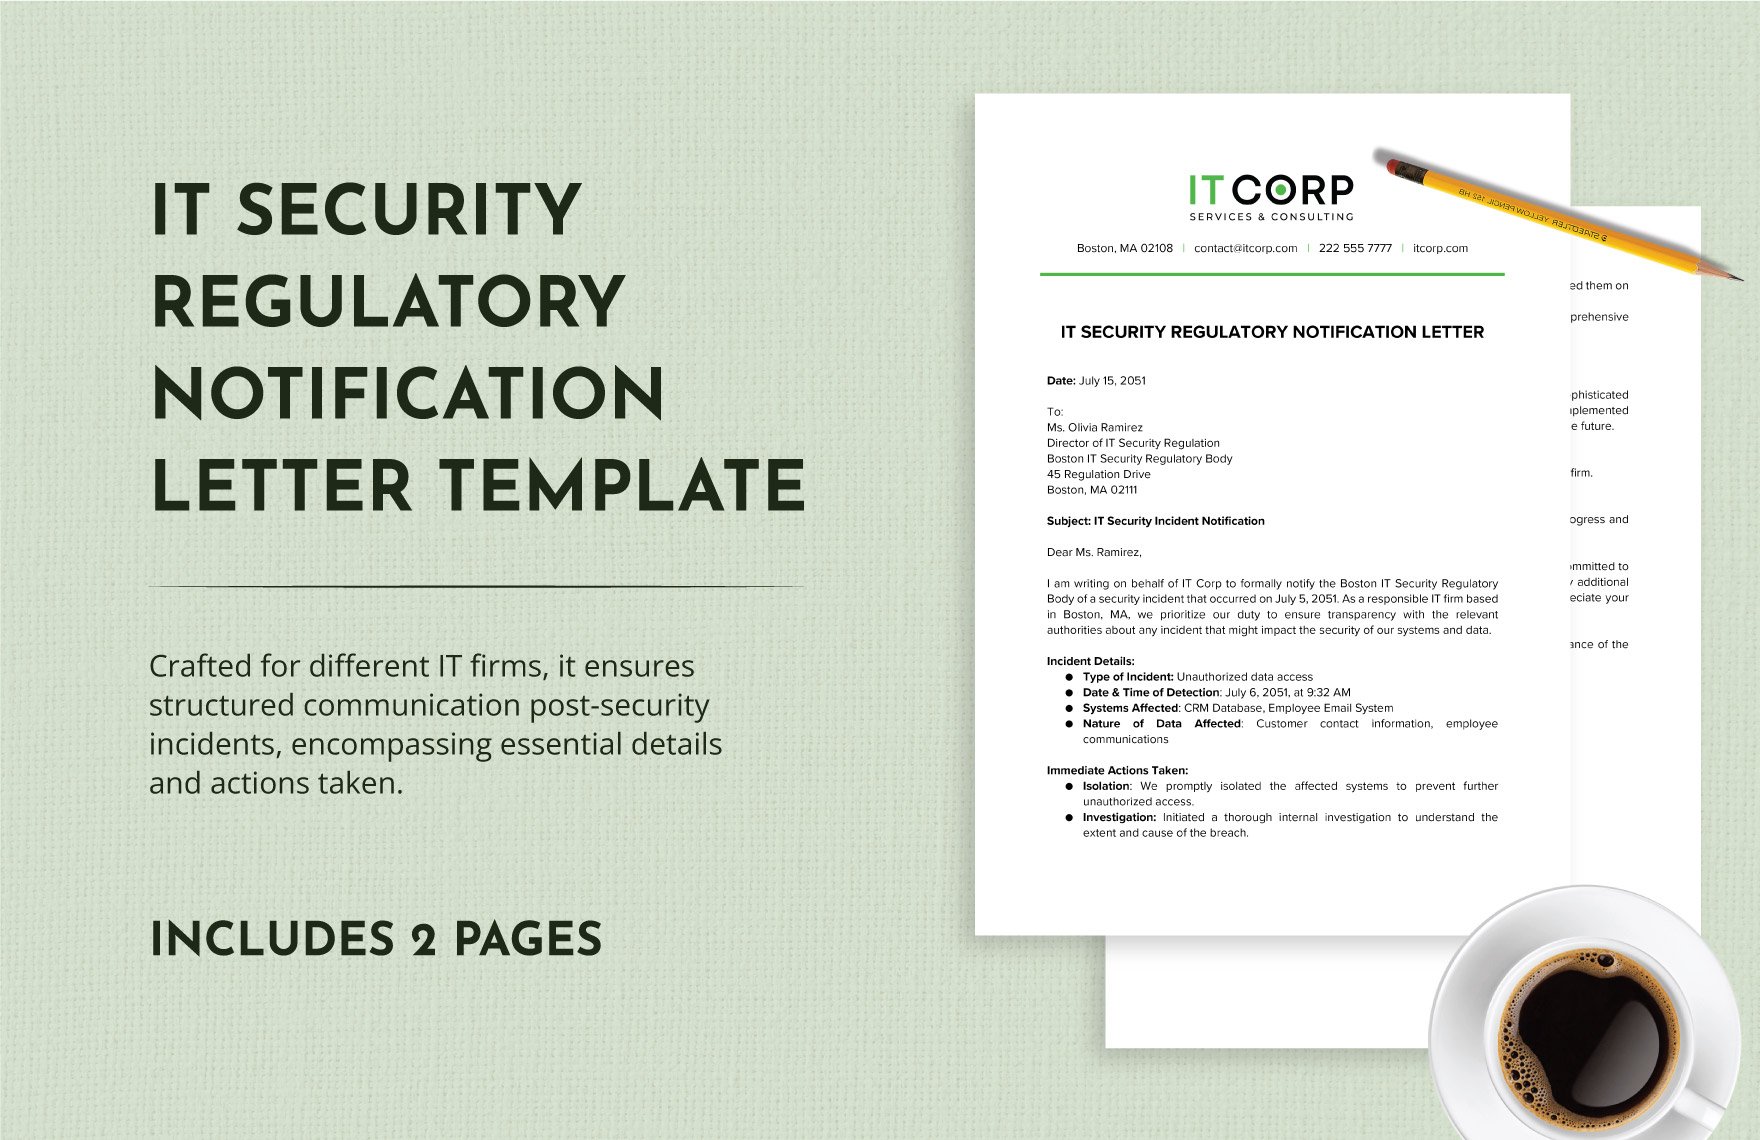 IT Security Regulatory Notification Letter Template